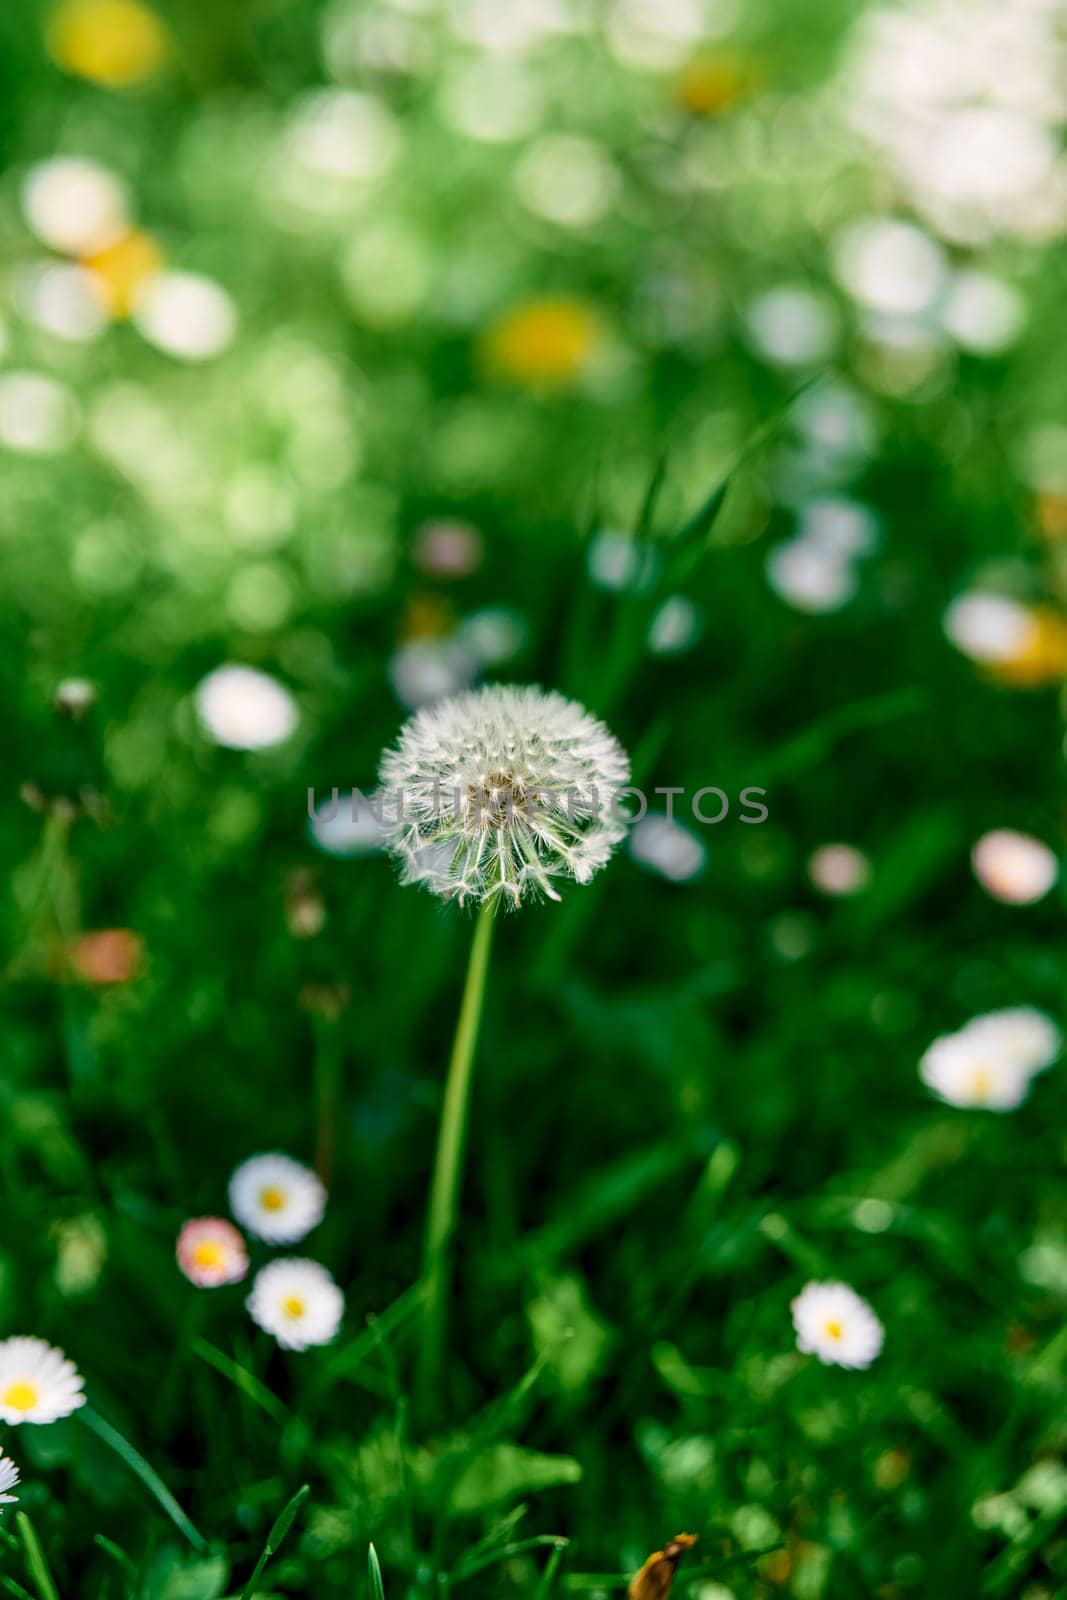 Fluffy dandelion grows in a green meadow among white daisies by Nadtochiy